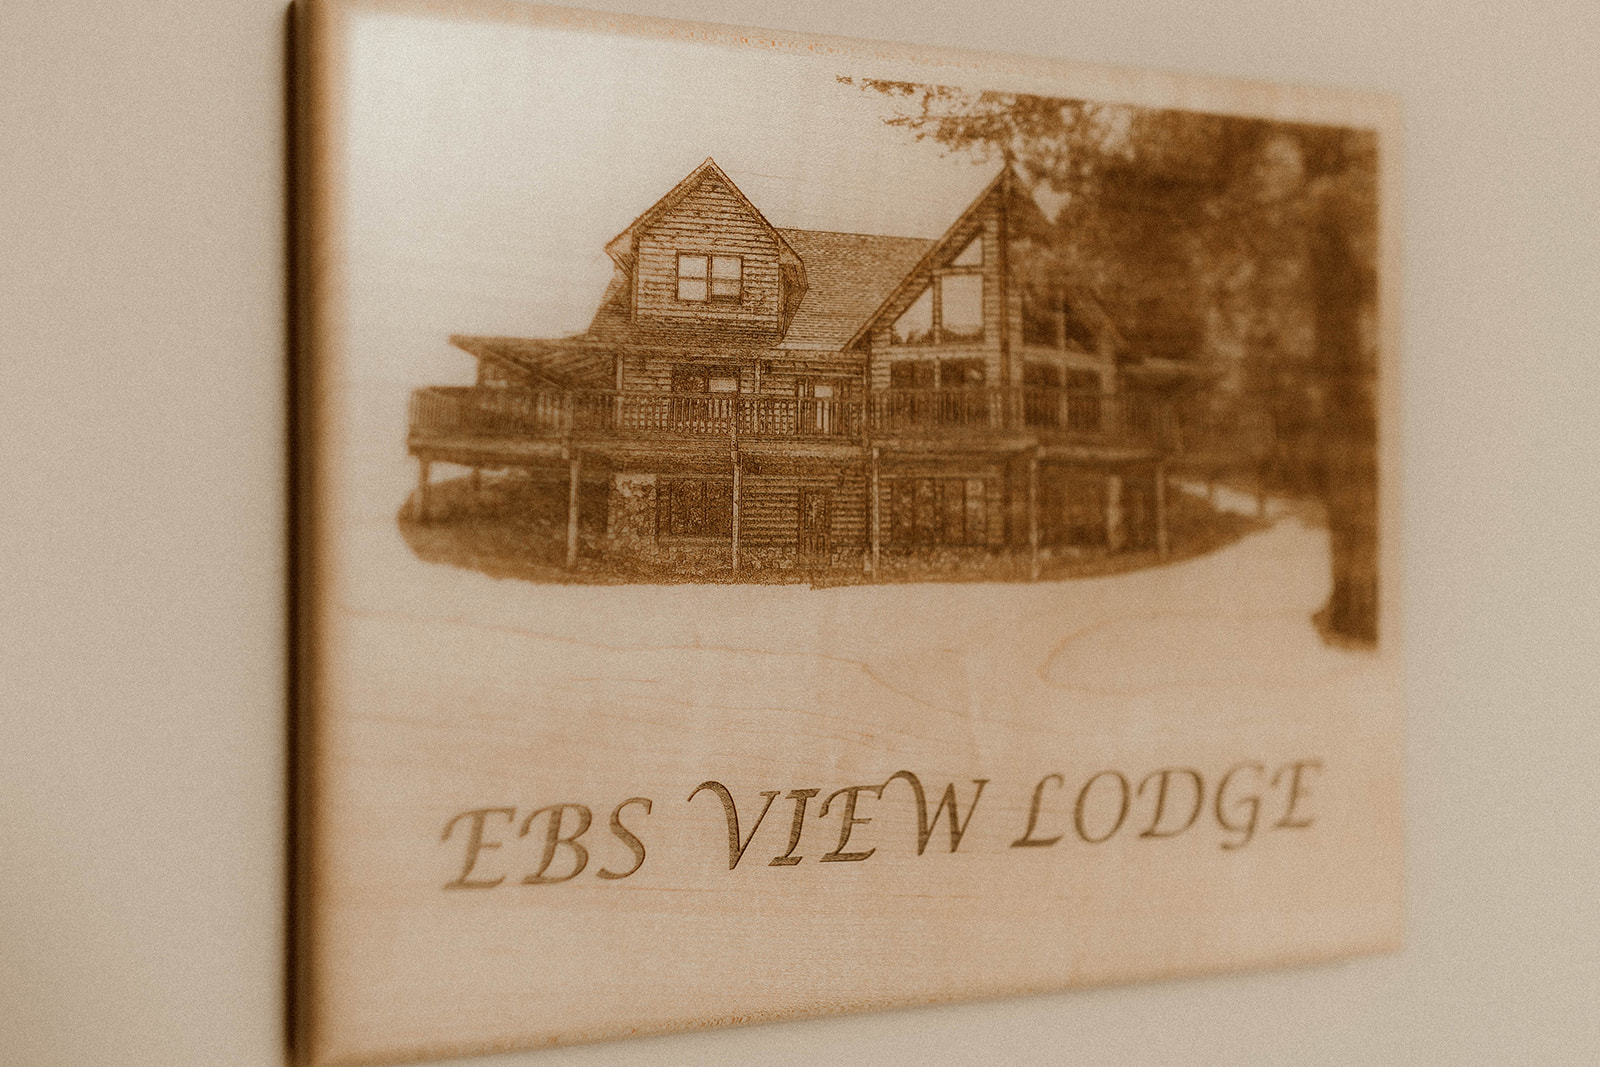 A plaque at the stunning EBS view lodge nestled in the Adirondack mountains